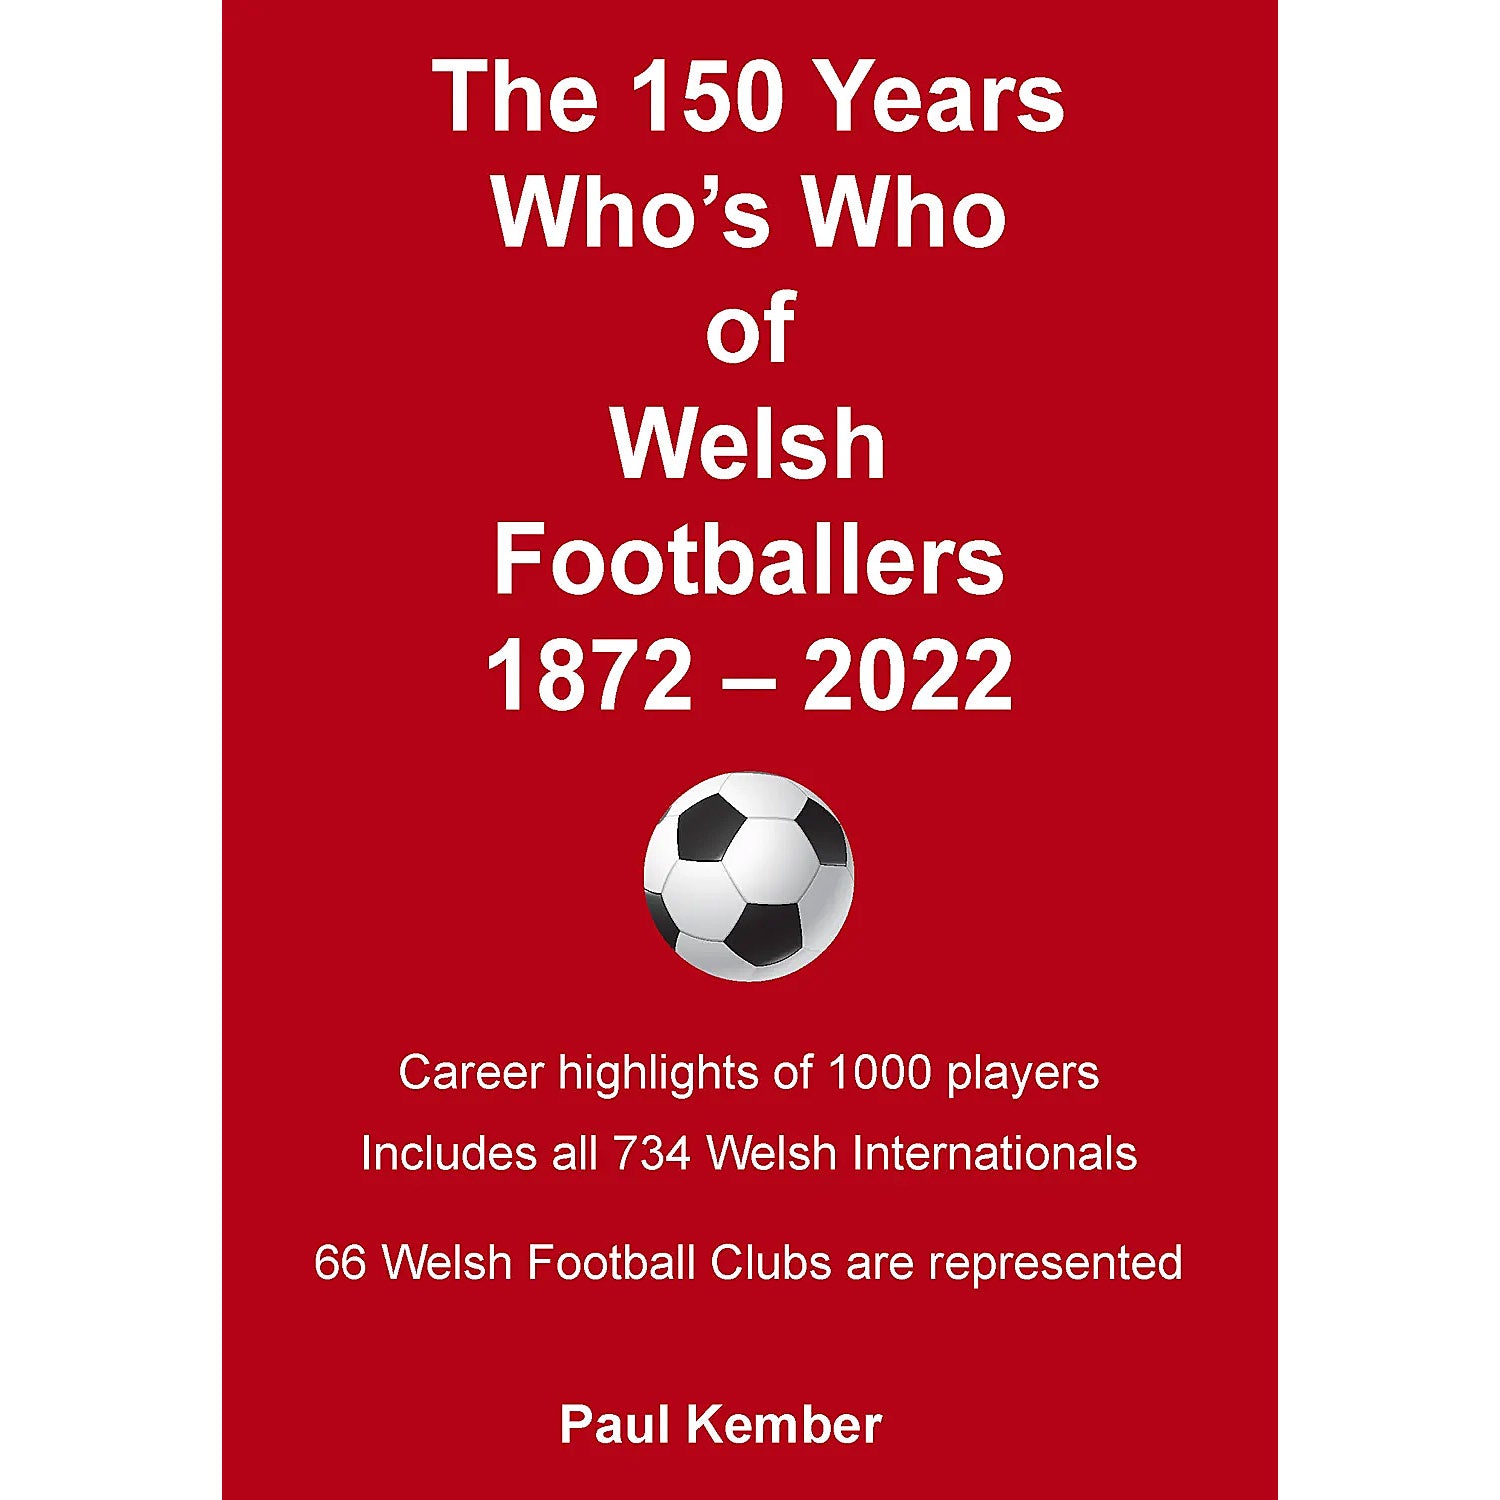 The 150 Years Who's Who of Welsh Footballers 1872-2022